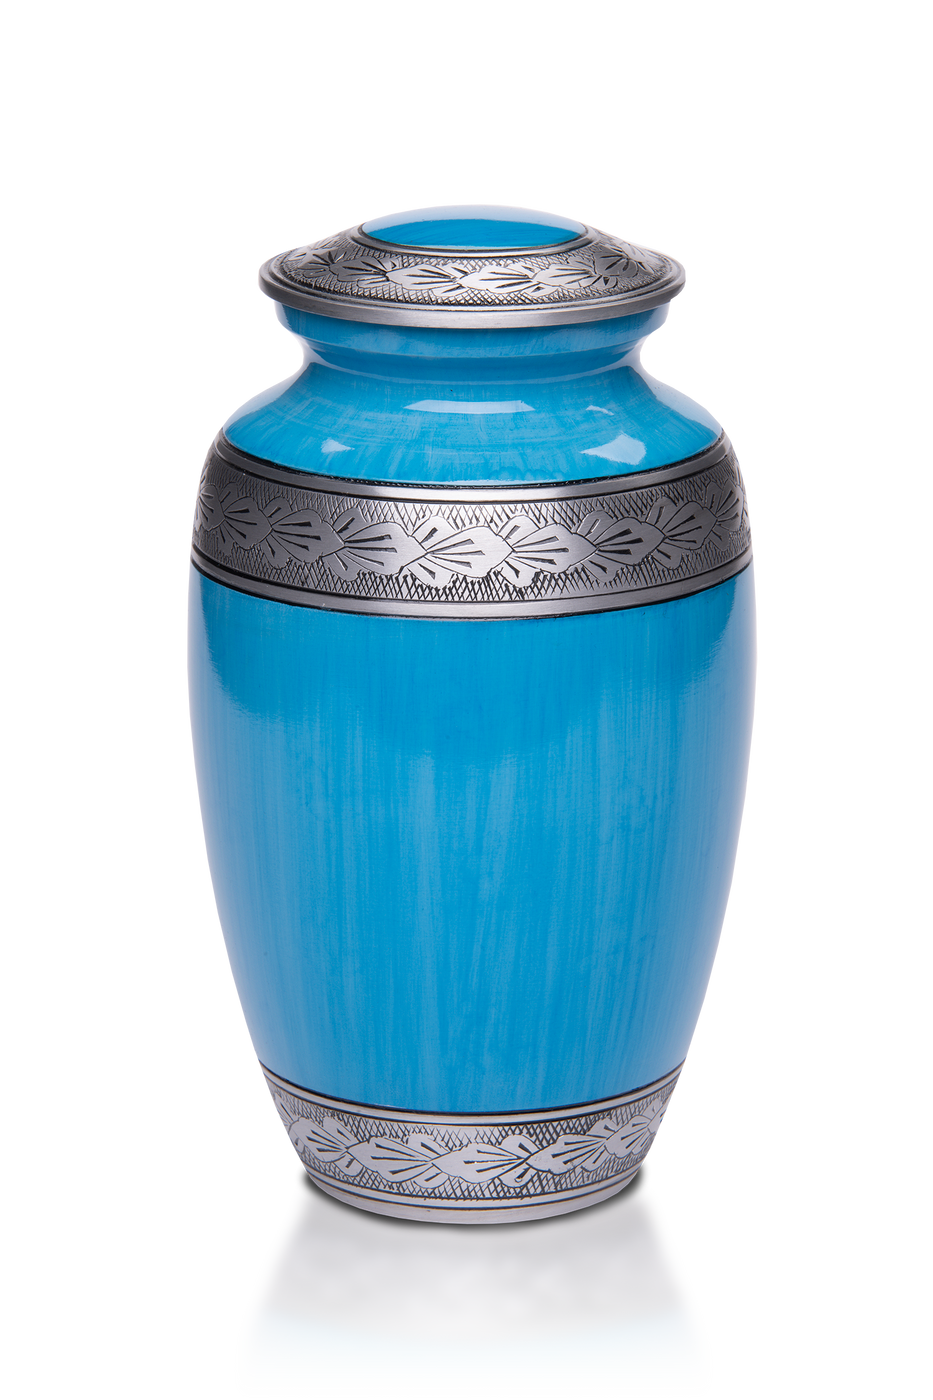 Alloy In Beautiful Blue Adult 200 Cu In Cremation Urn — Afterlife Essentials 